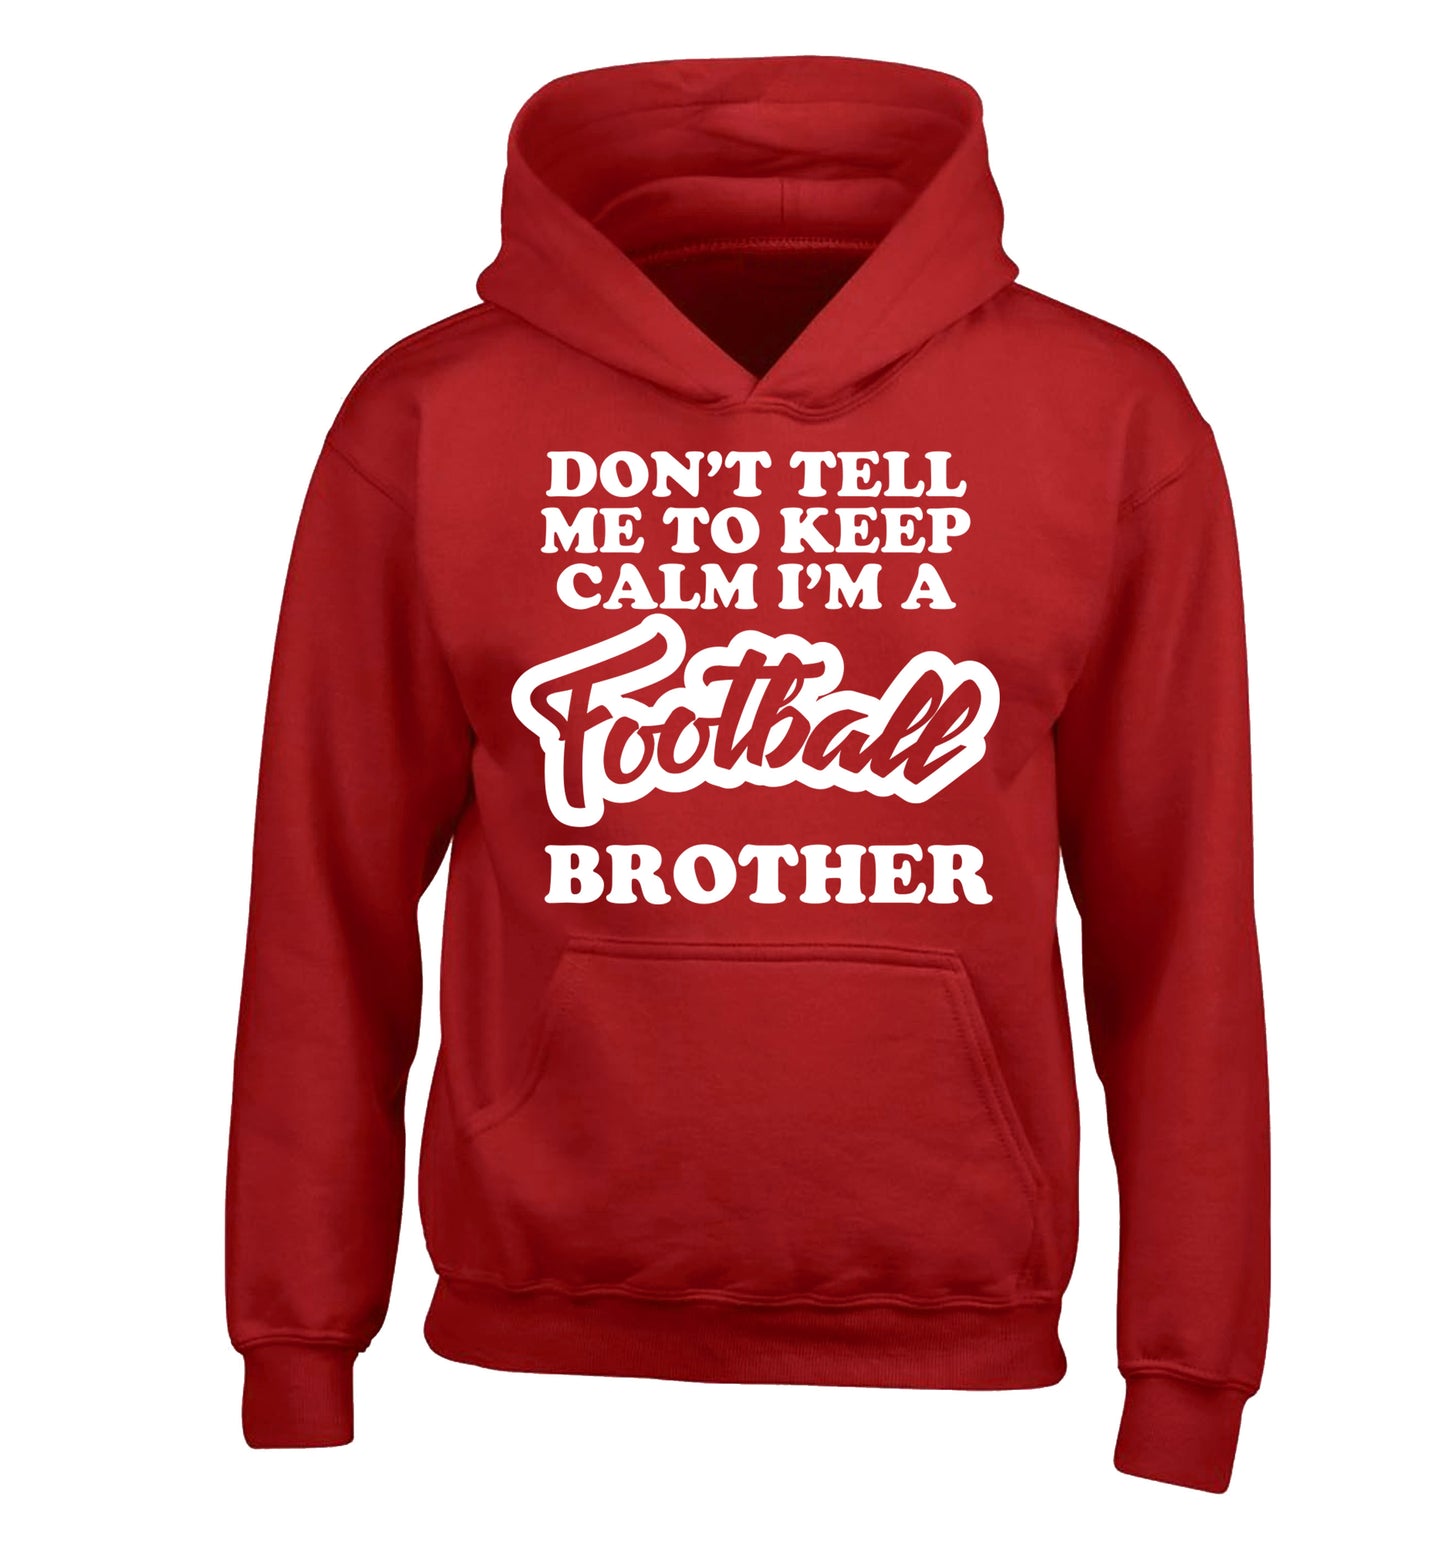 Don't tell me to keep calm I'm a football brother children's red hoodie 12-14 Years